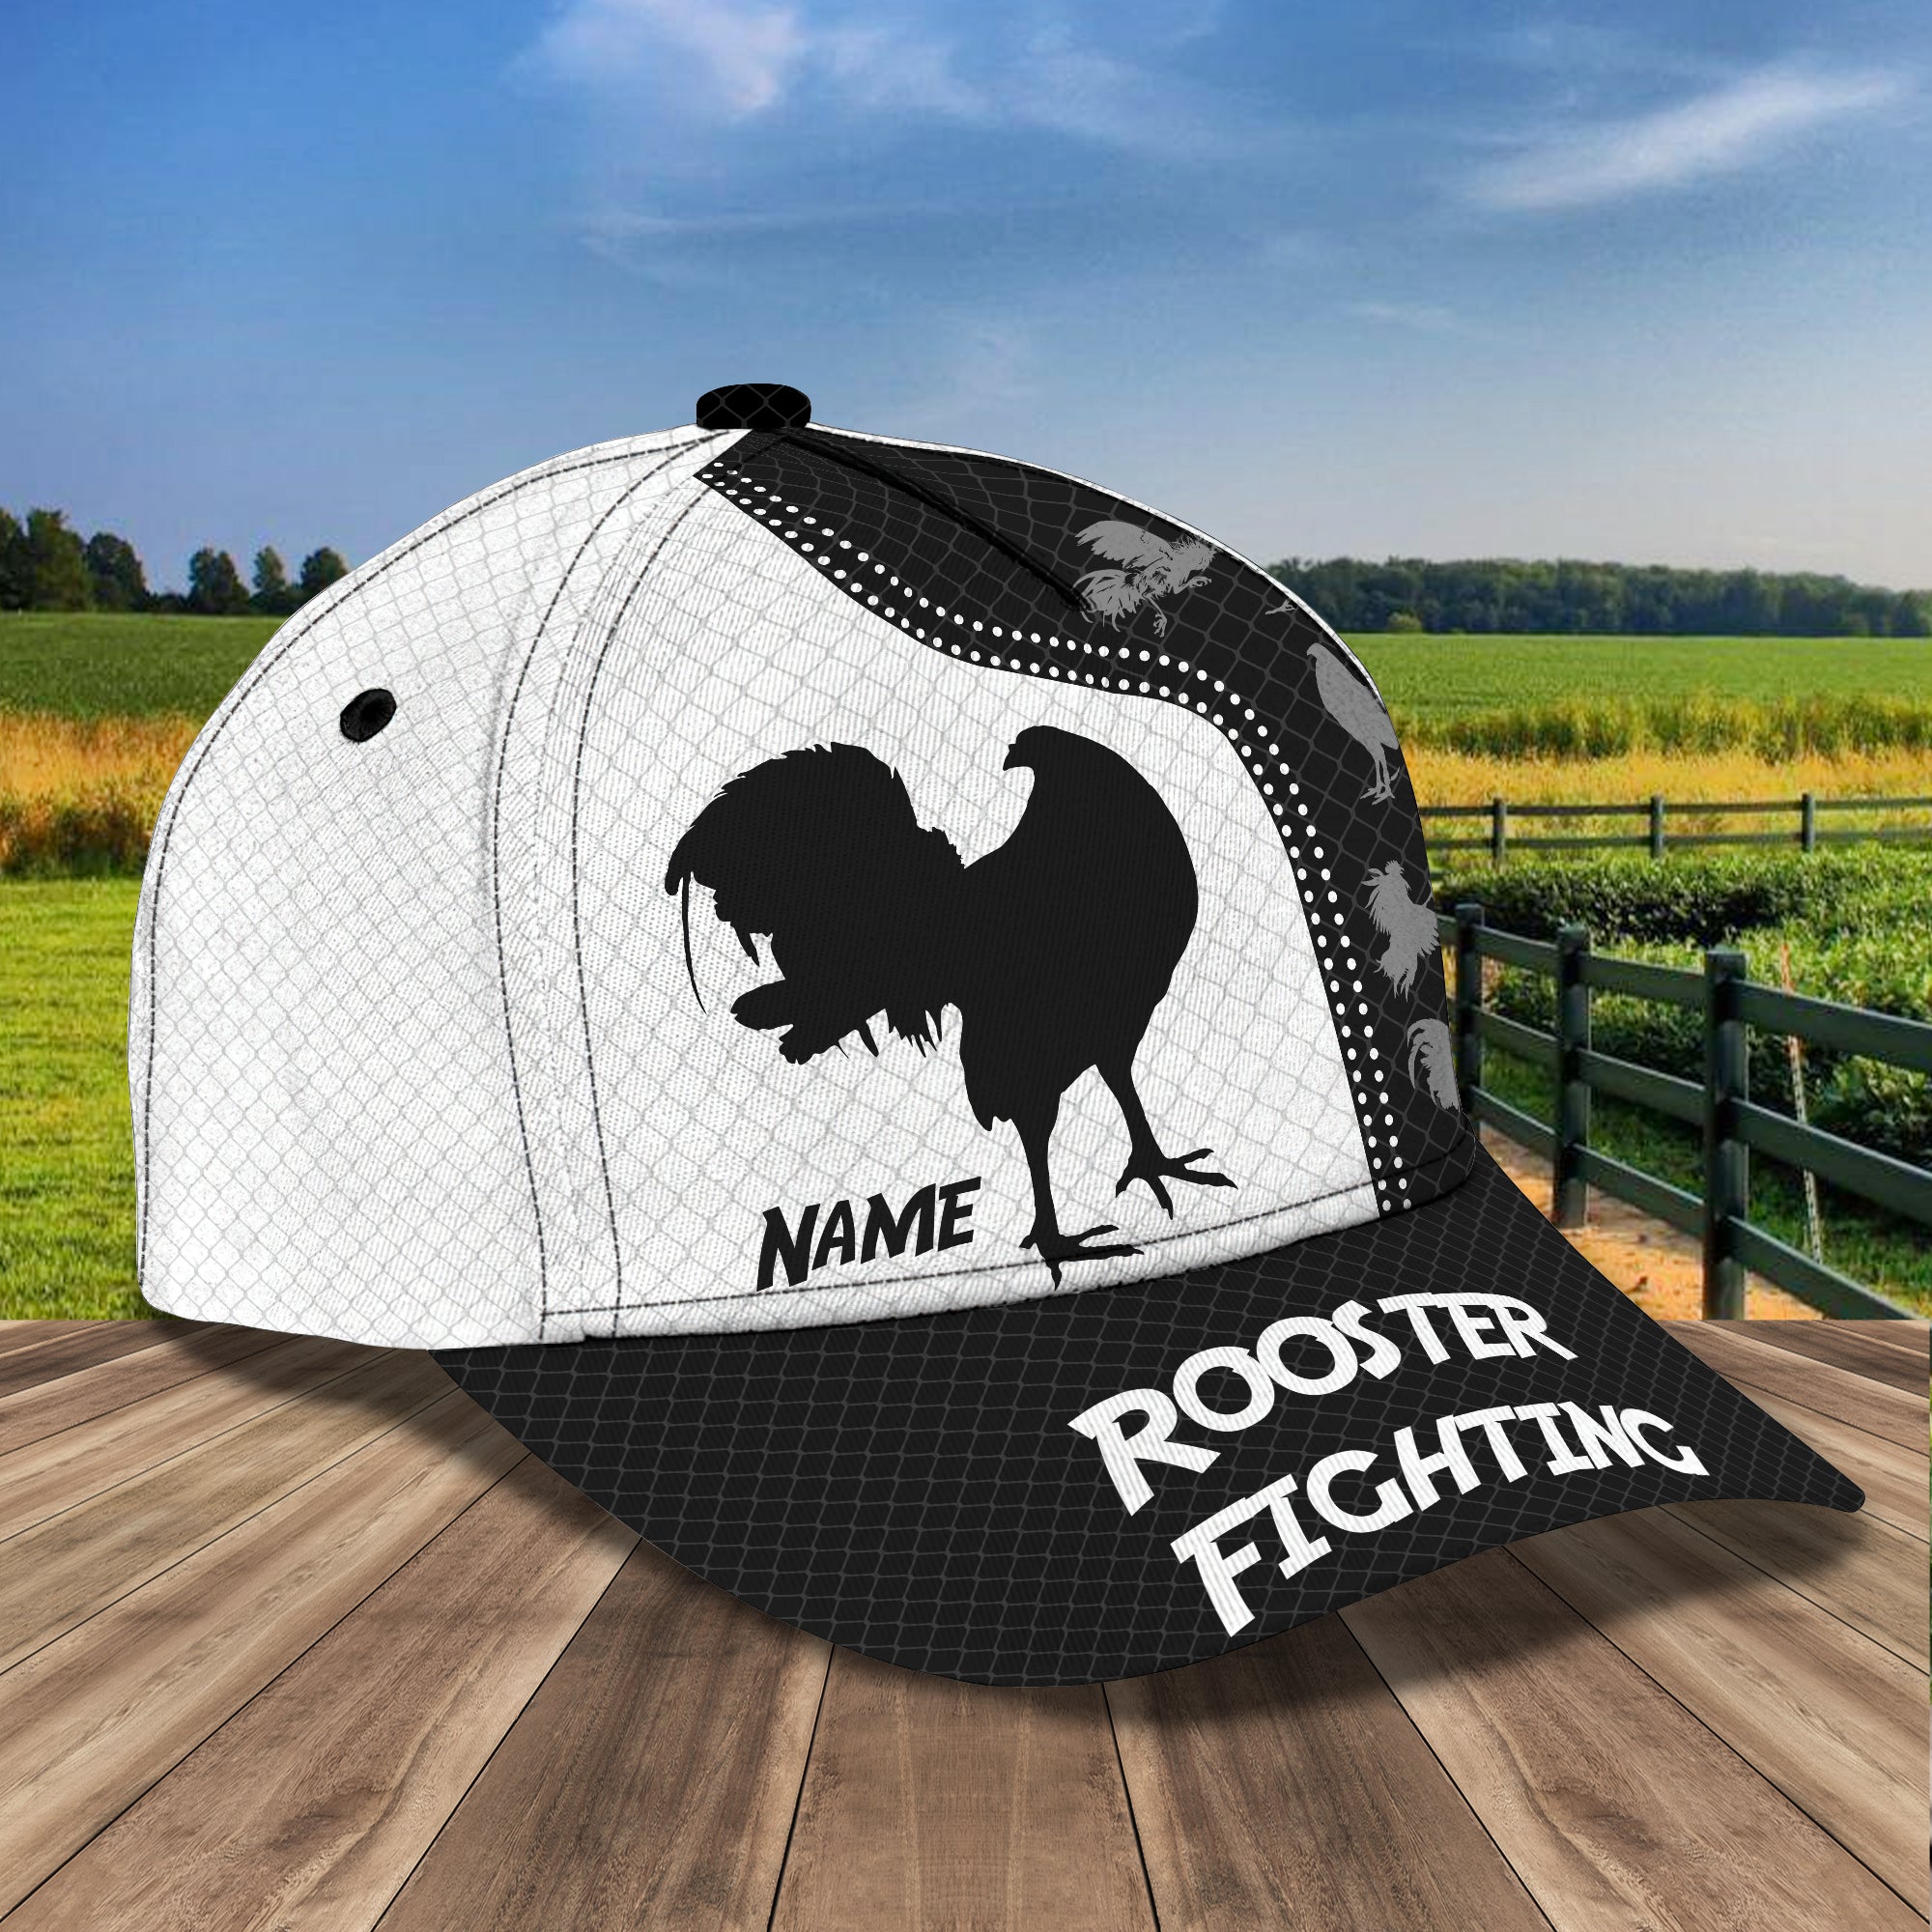 nnta - Personalized Name Cap - Rosster 02